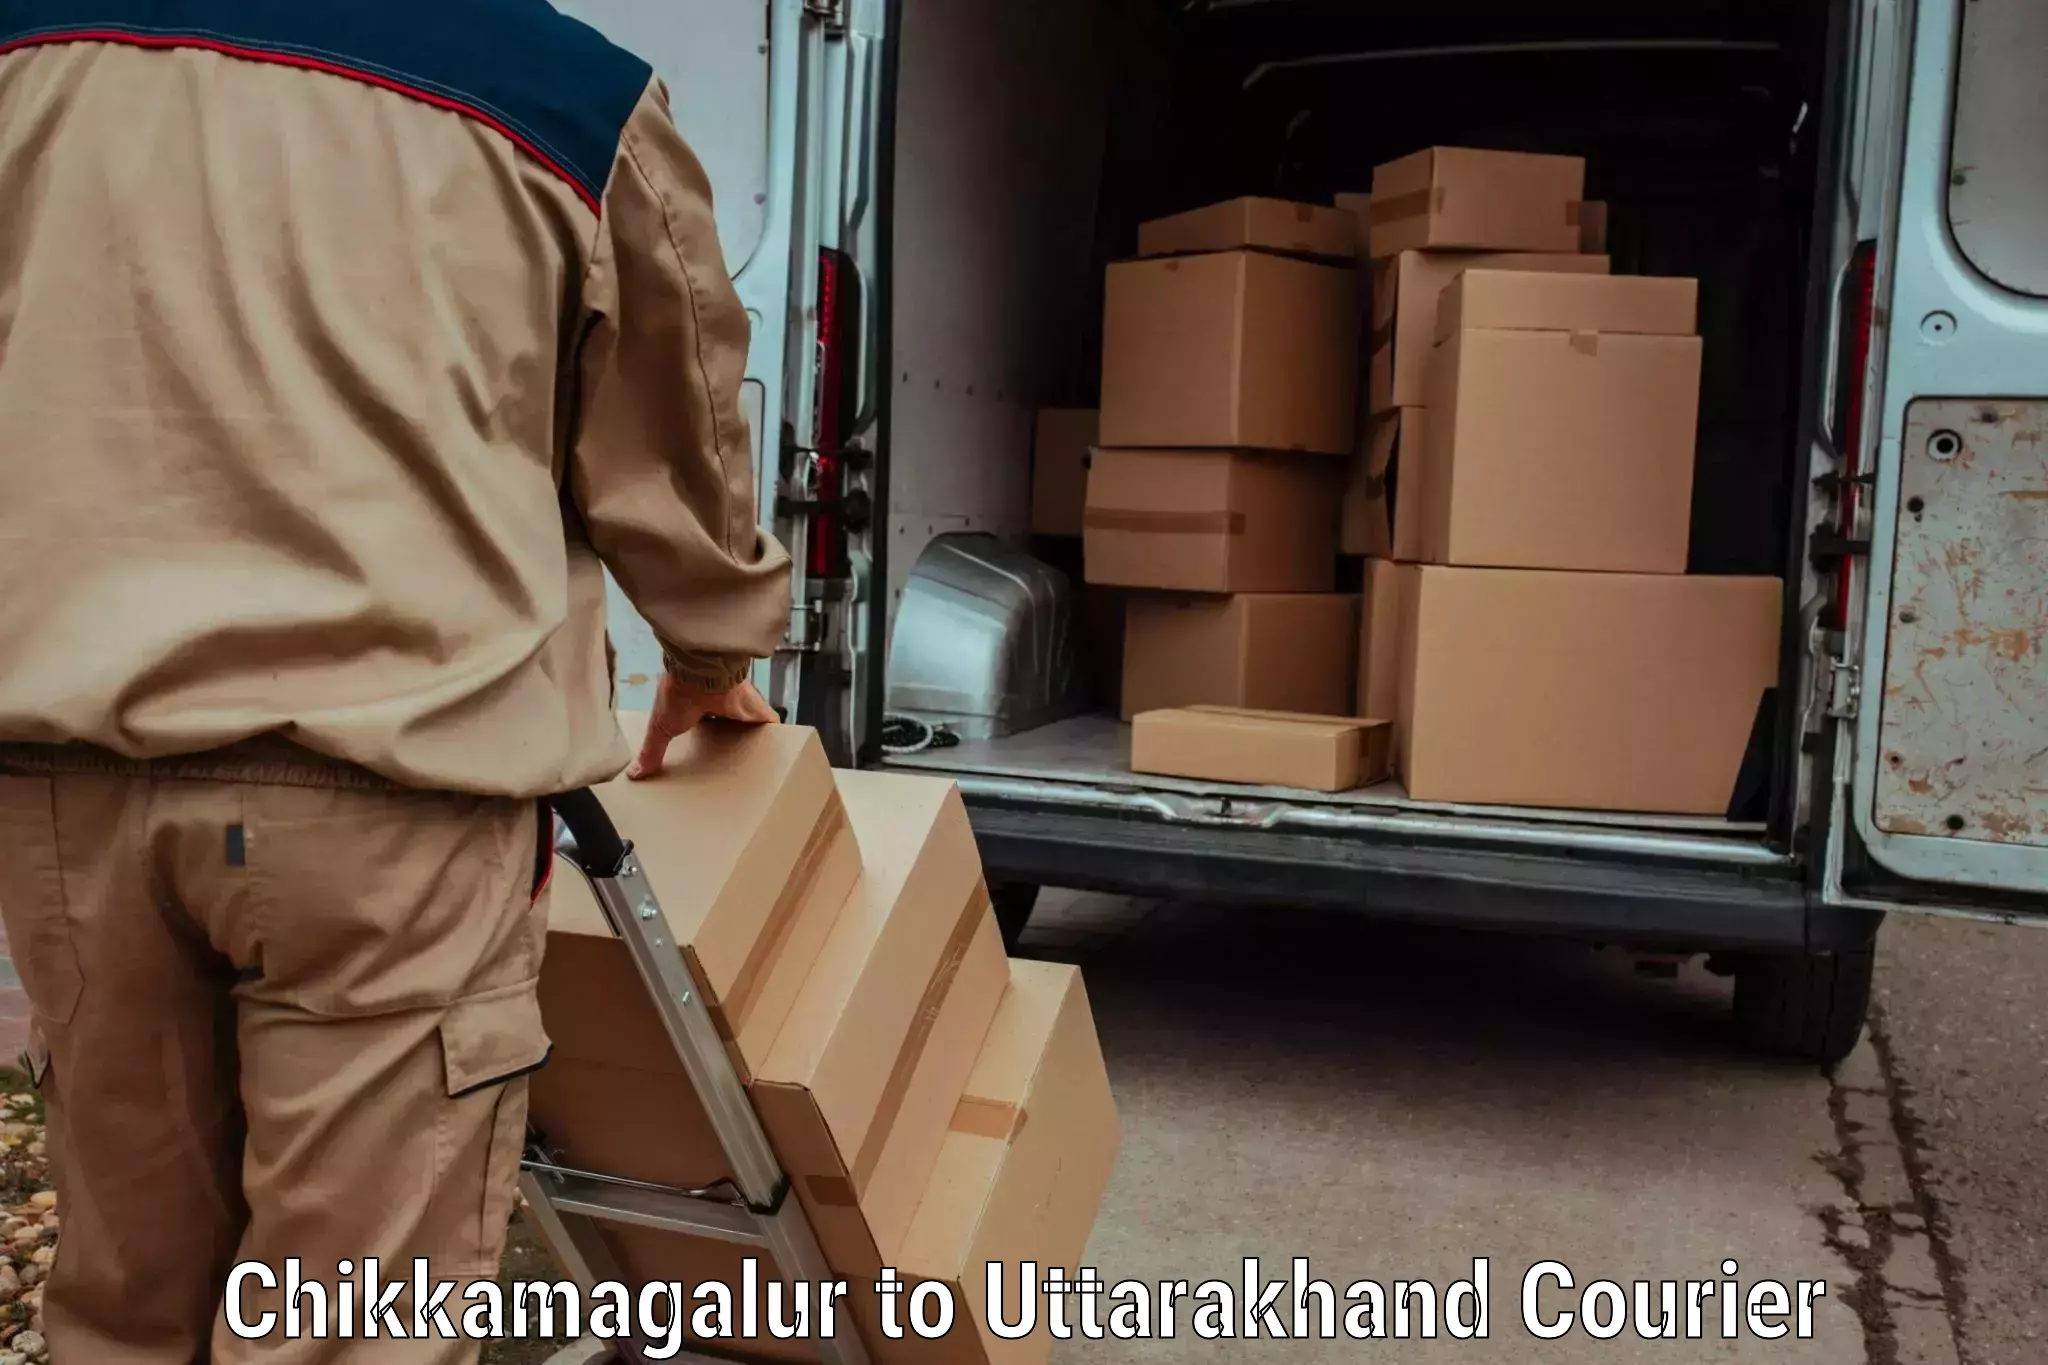 Reliable courier service in Chikkamagalur to Rudraprayag